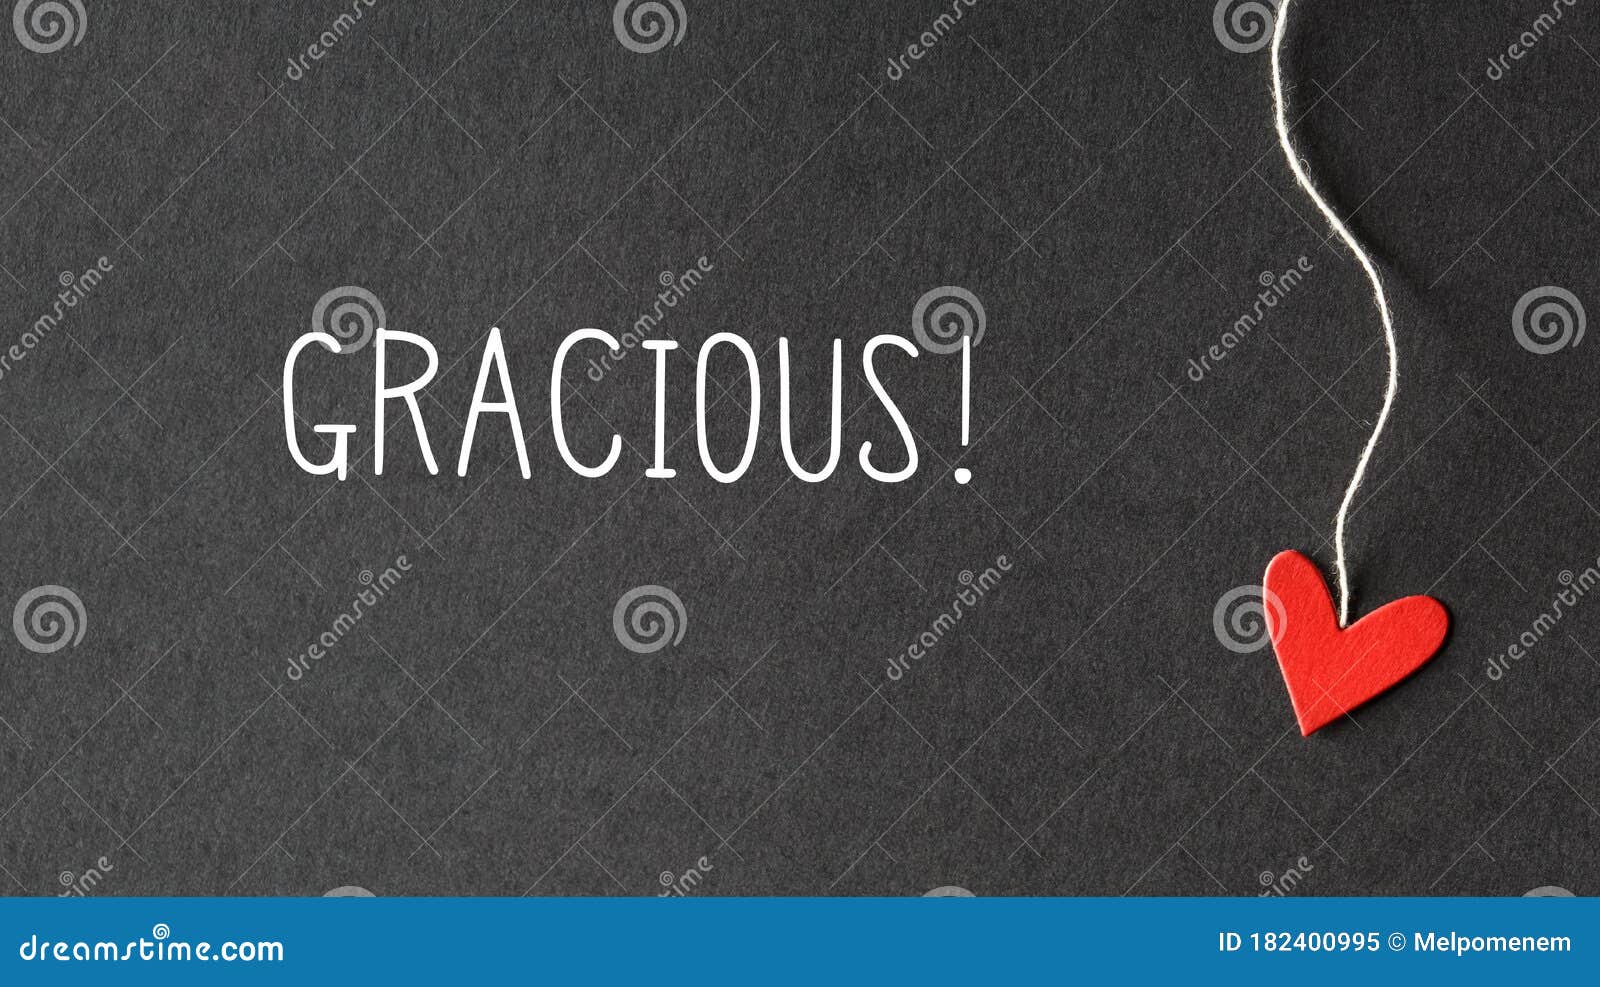 Gracious - Thank You In Spanish Language With Paper Hearts Stock Image ...
